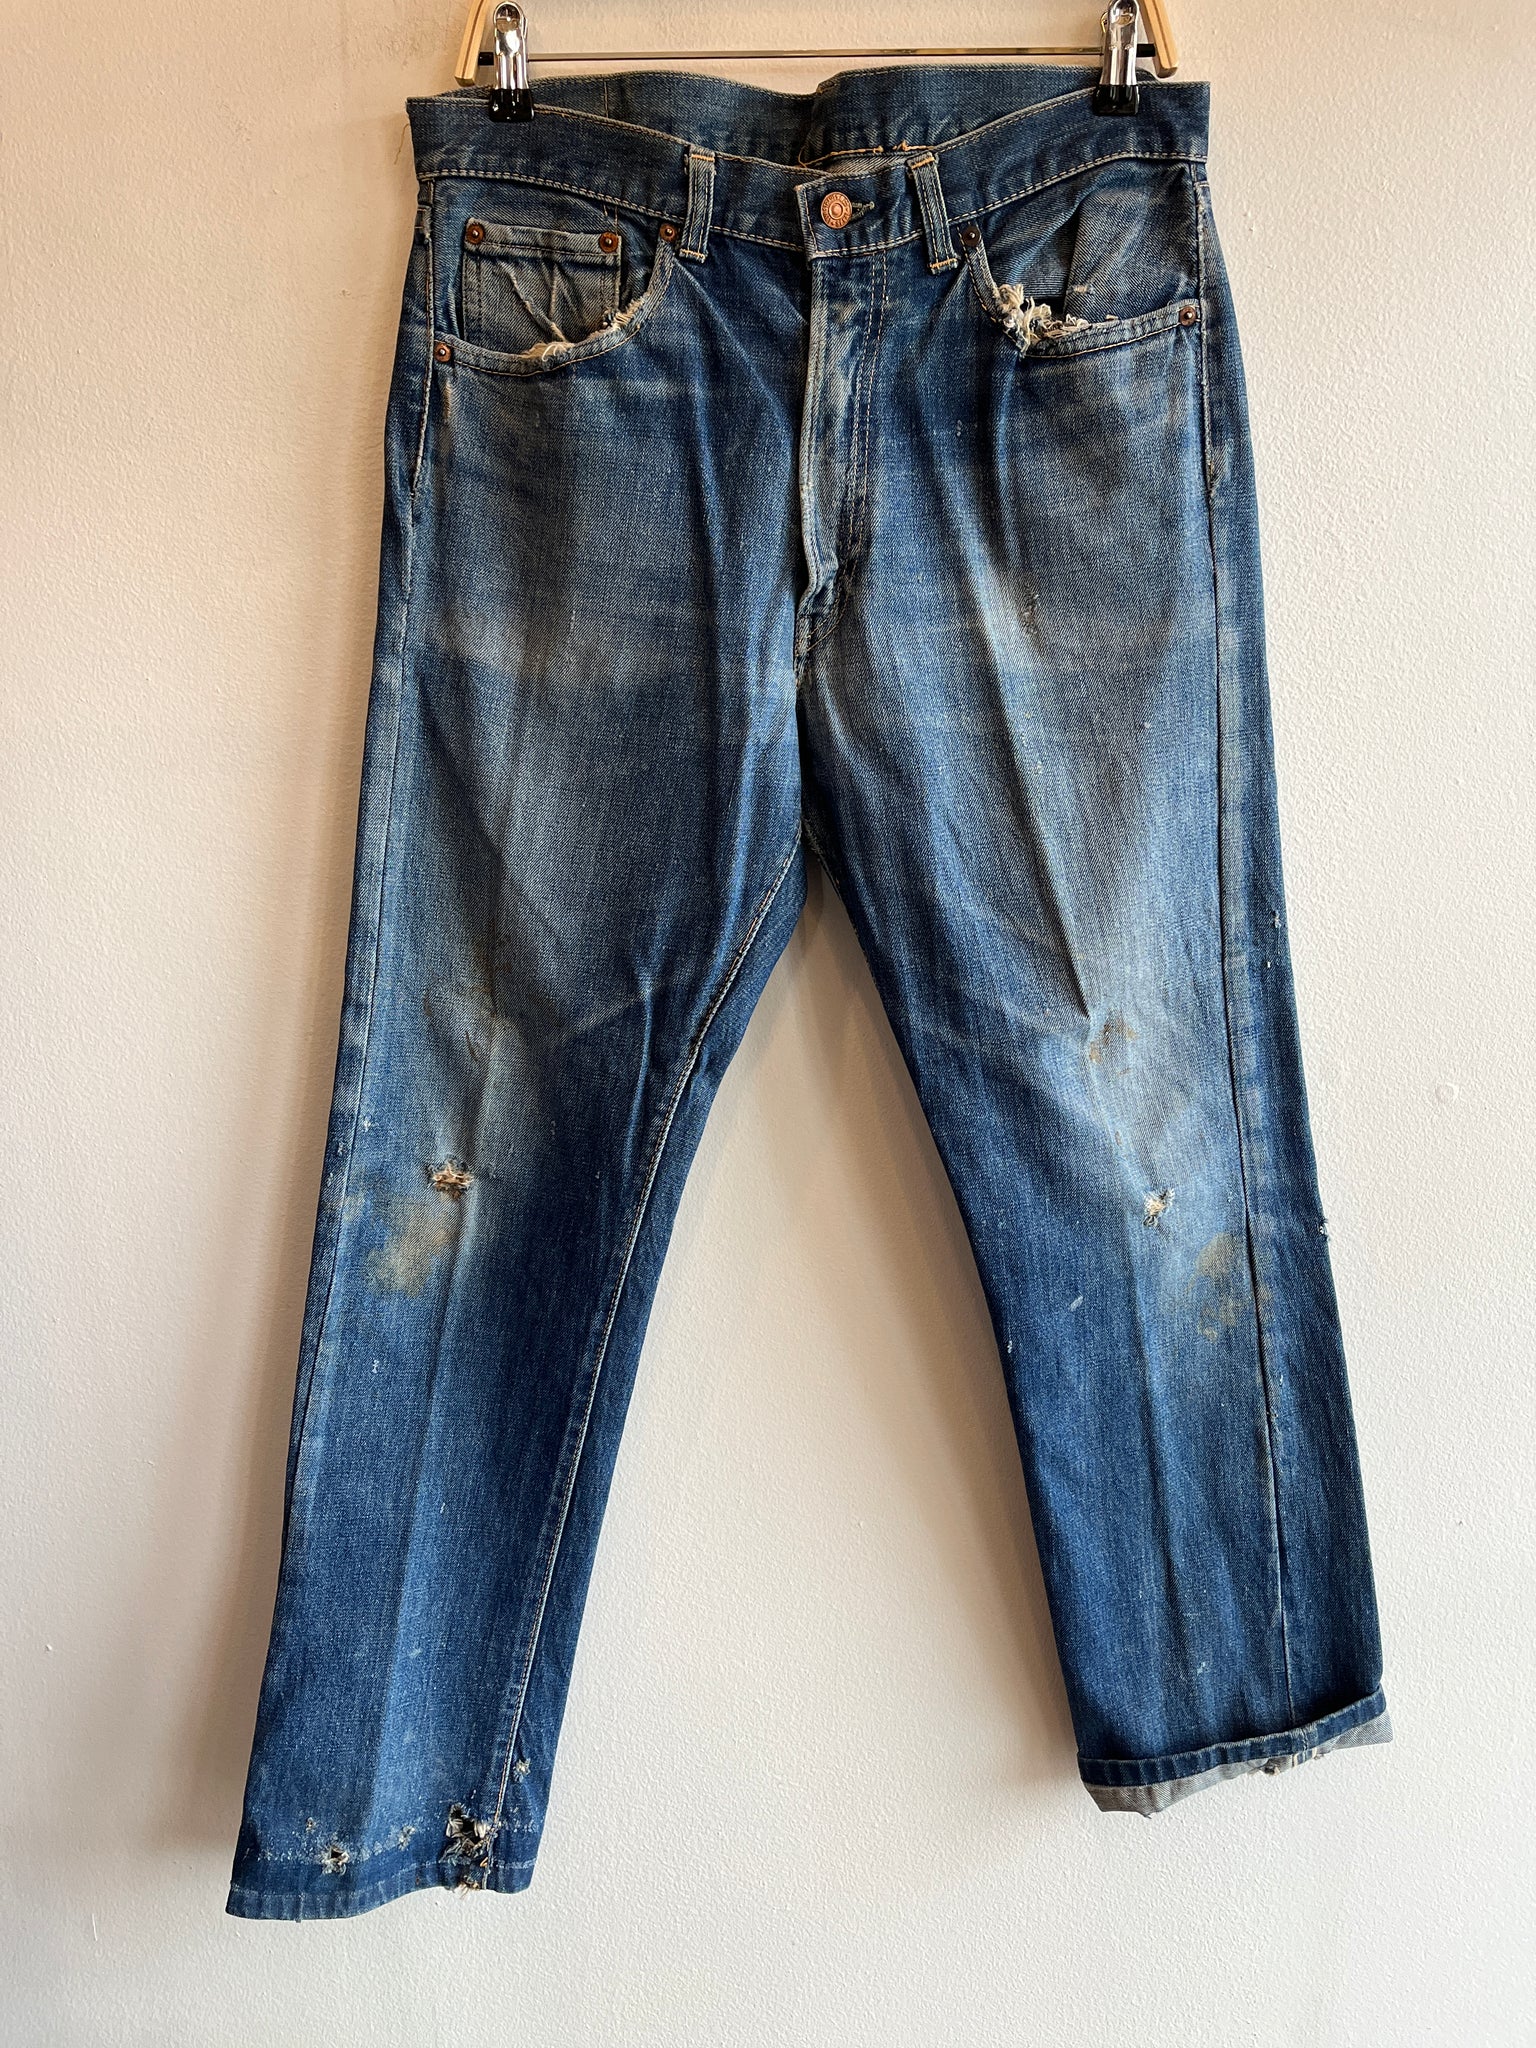 LEVIS 505 BIG-E Type-A with Selvedge